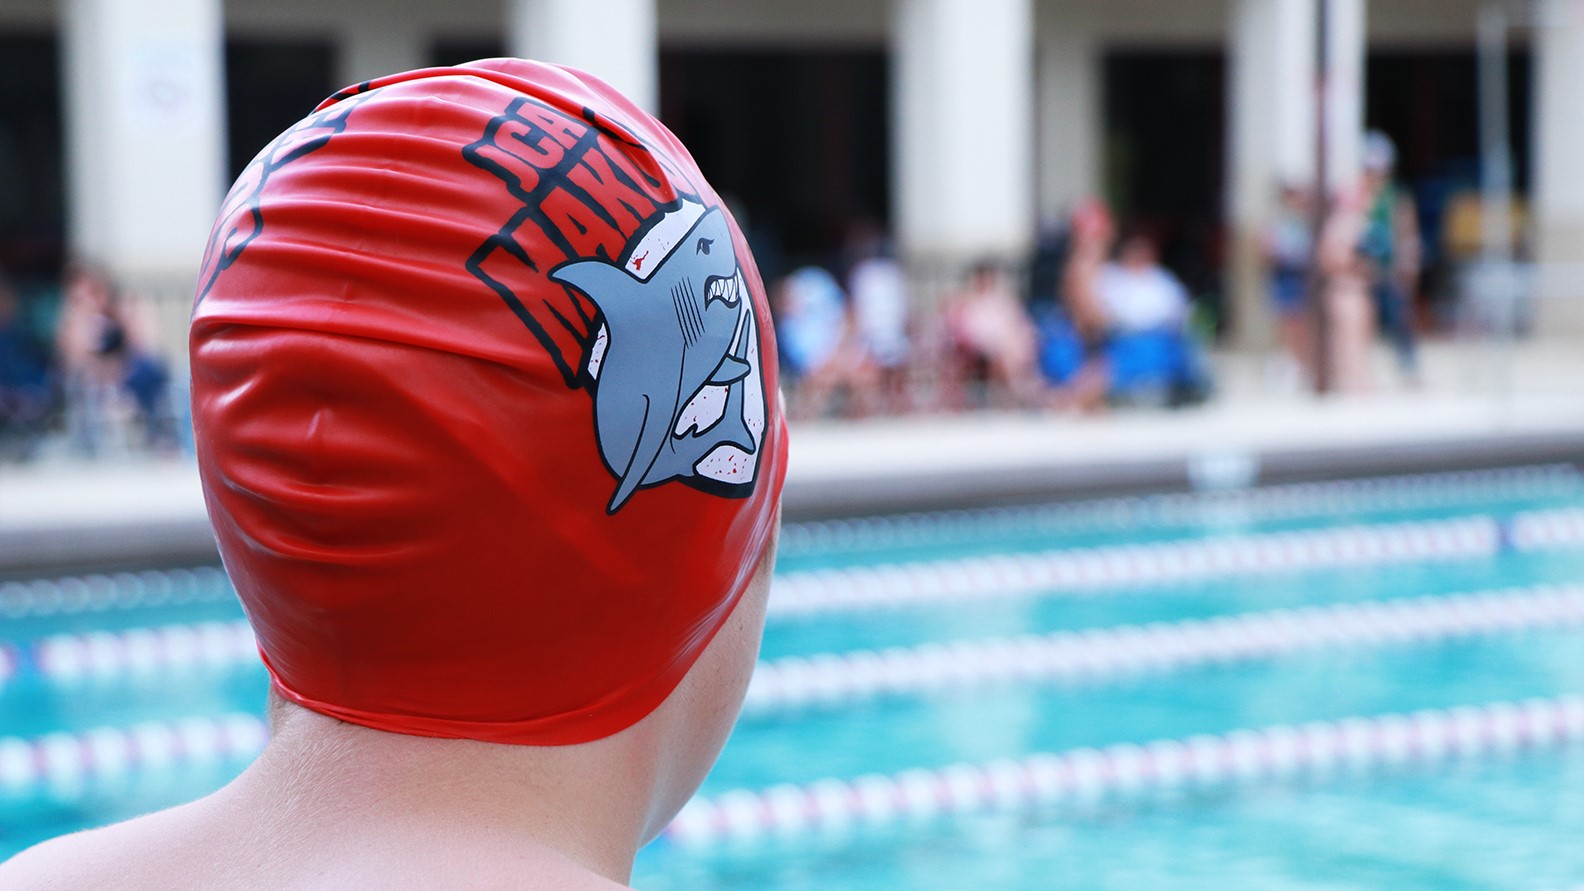 A boy wearing a red swim cap in front of a swimming pool.